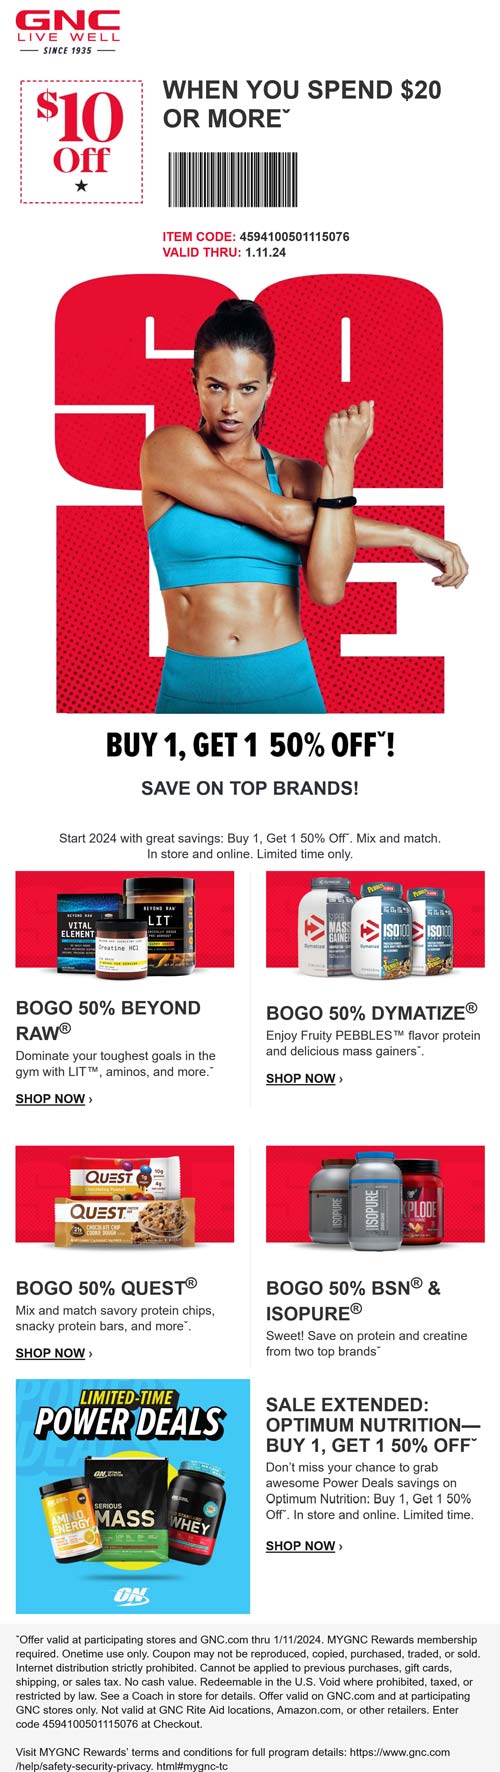 Second item 50% off & more today at GNC, ditto online #gnc